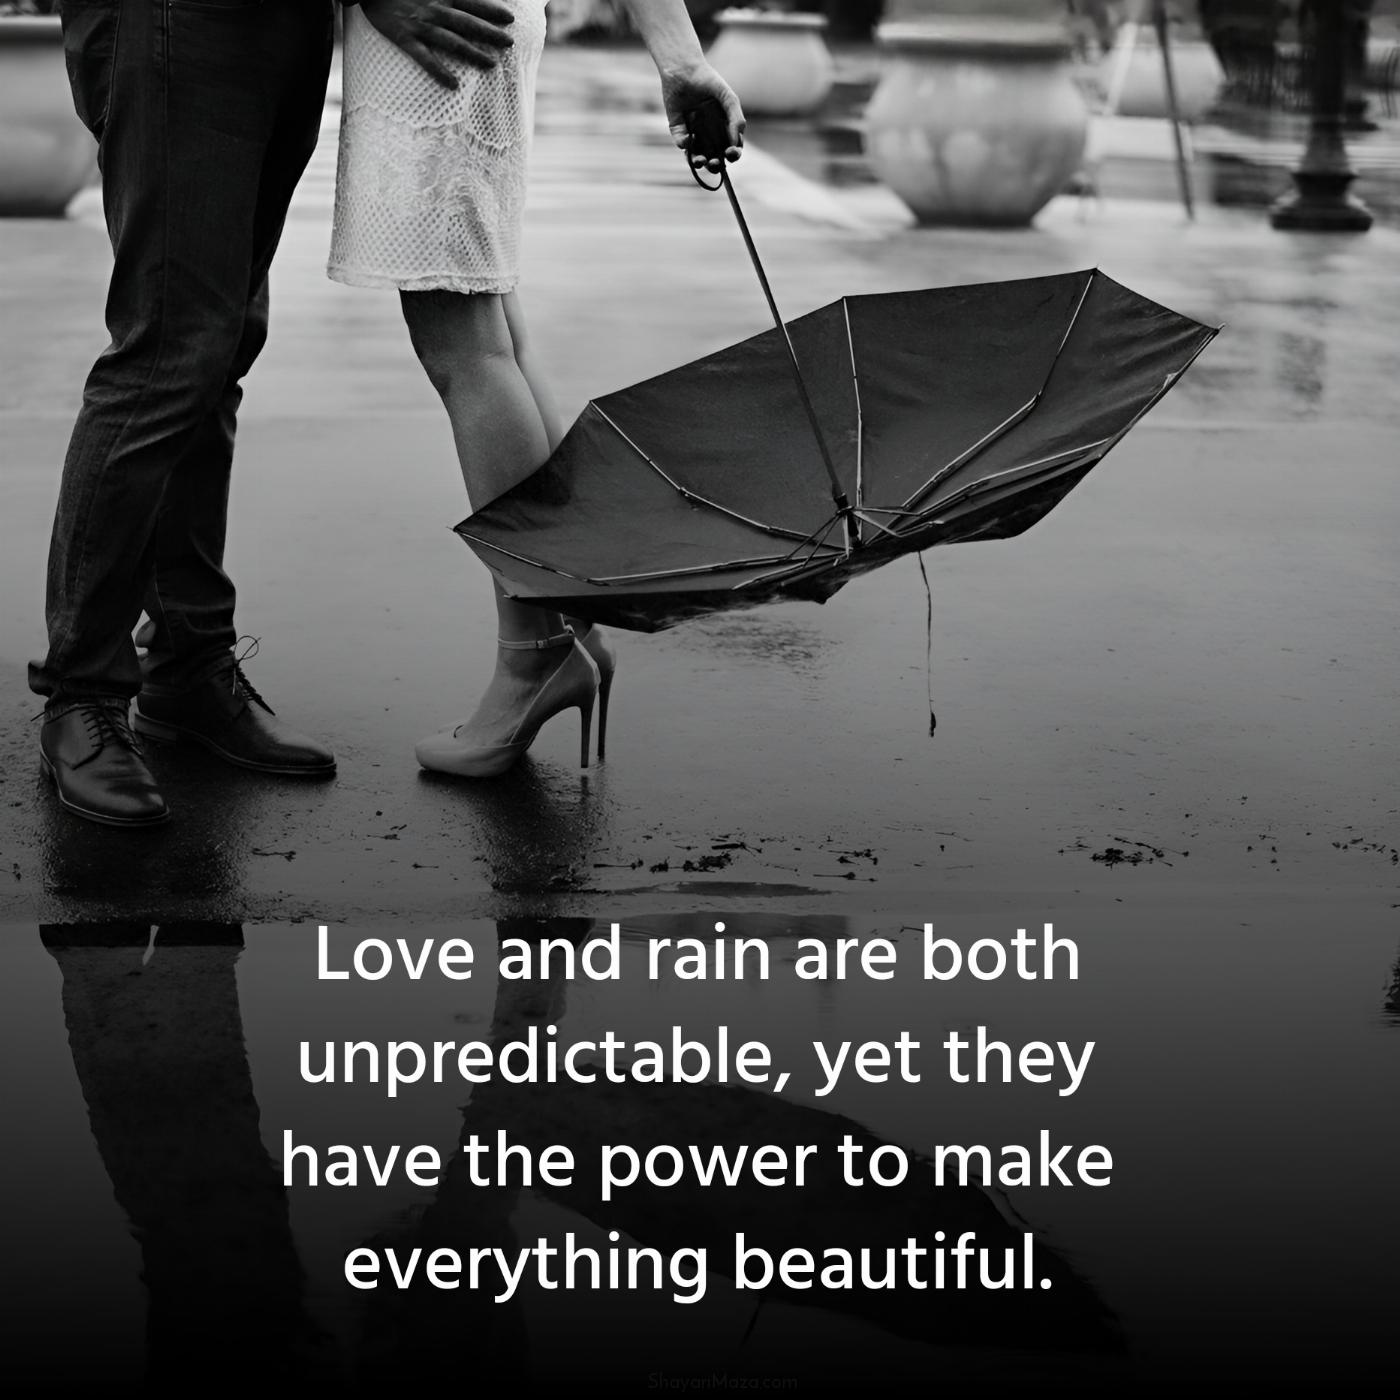 Love and rain are both unpredictable yet they have the power